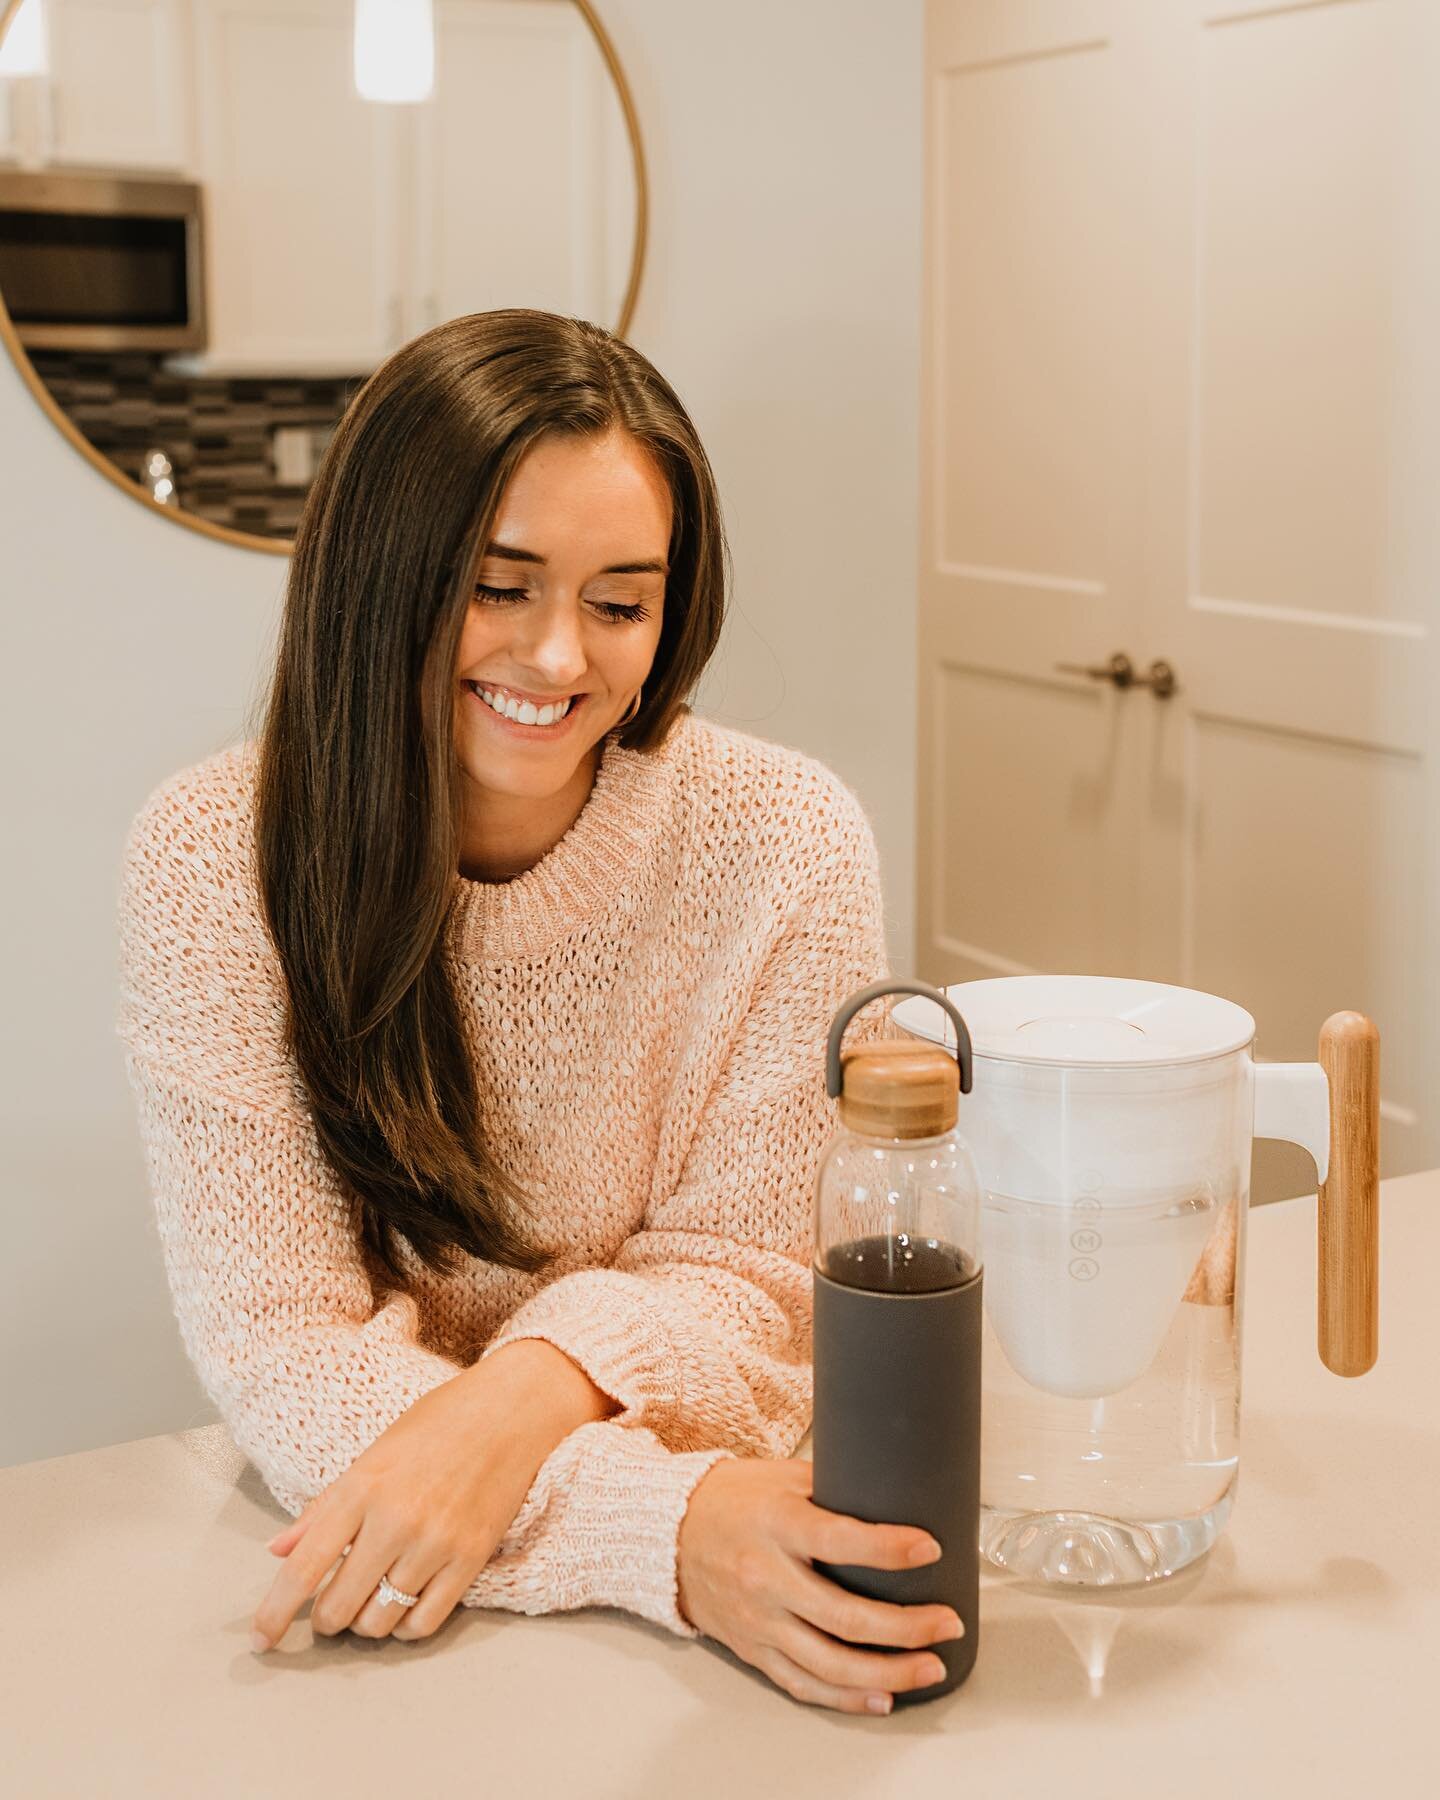 GIVEAWAY!✨
 
I have teamed up with @somawater to keep you hydrated in style with your chance to win a 10-Cup Pitcher and a 25 Oz. Glass Bottle. Entering is simple: 

&bull;Follow @somawater and @byolivialee

&bull;Like this post

&bull;Tag a friend i